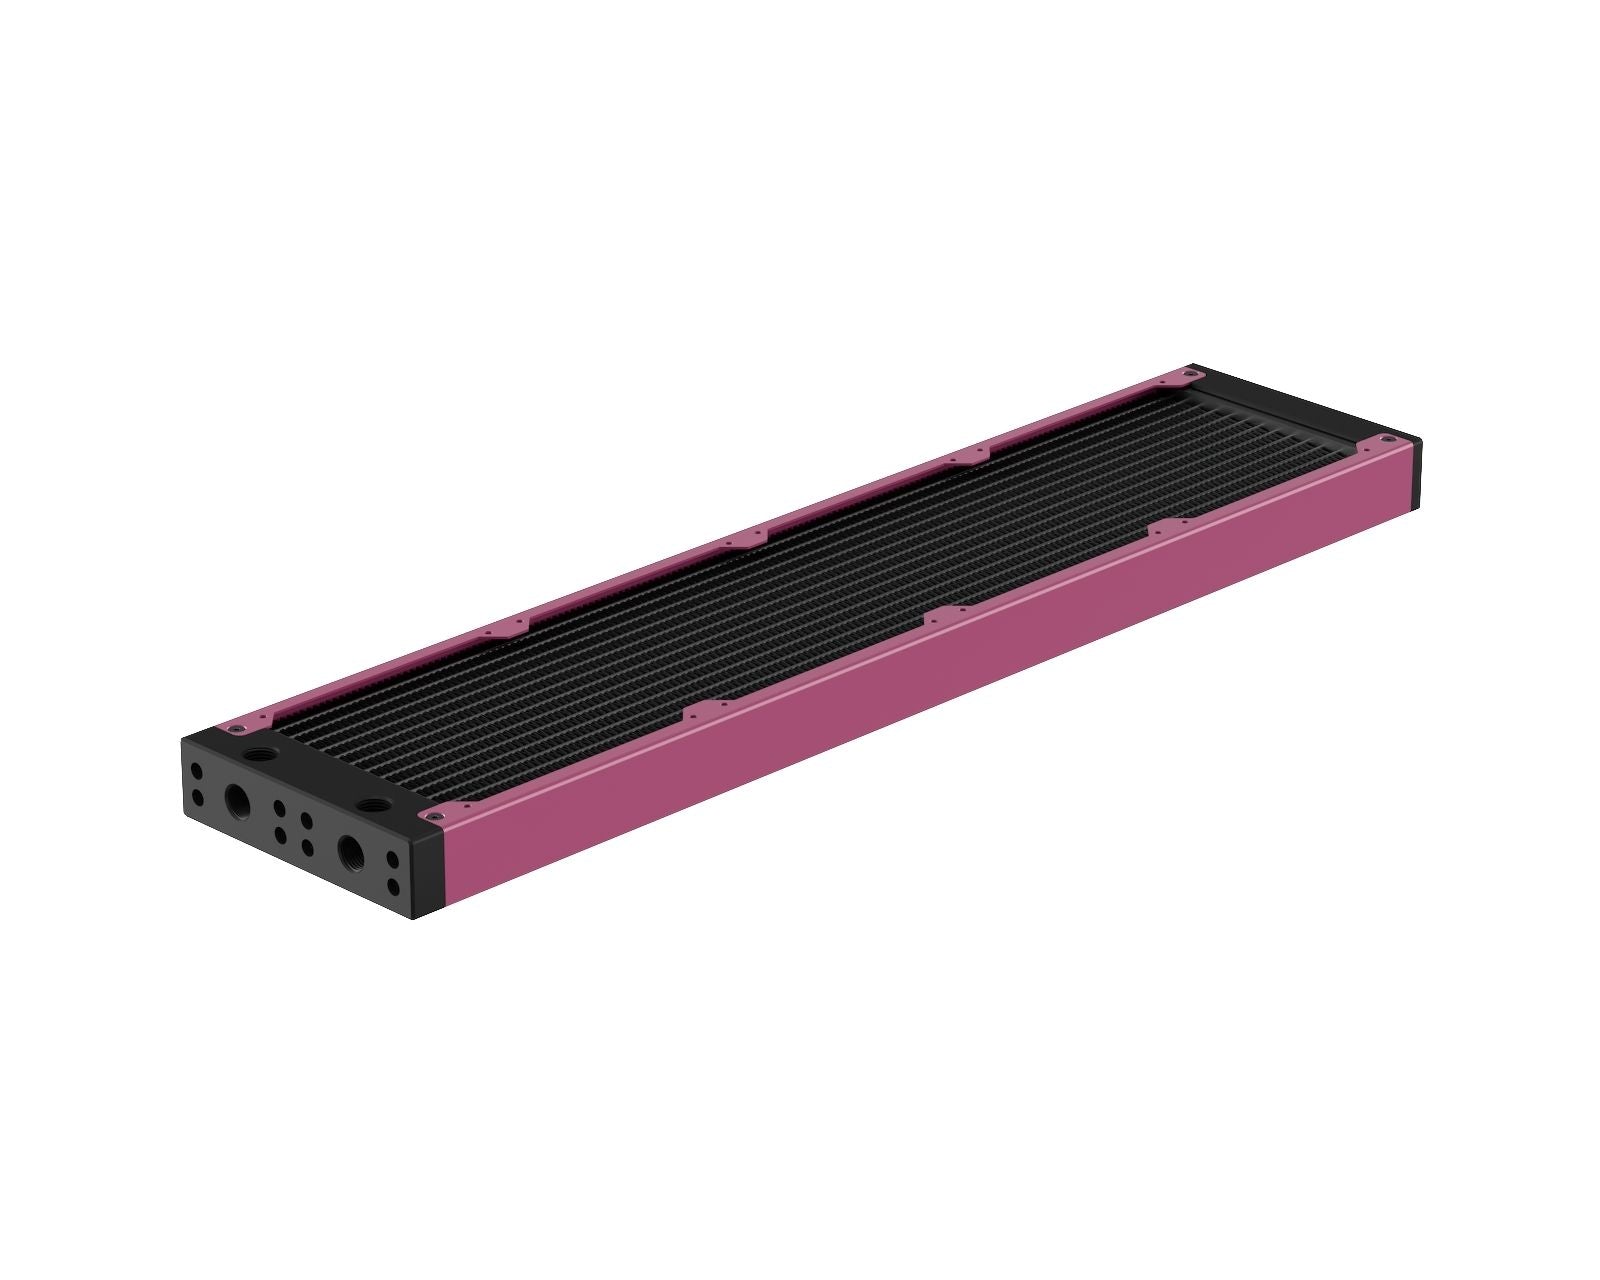 PrimoChill 480SL (30mm) EXIMO Modular Radiator, Black POM, 4x120mm, Quad Fan (R-SL-BK48) Available in 20+ Colors, Assembled in USA and Custom Watercooling Loop Ready - Magenta